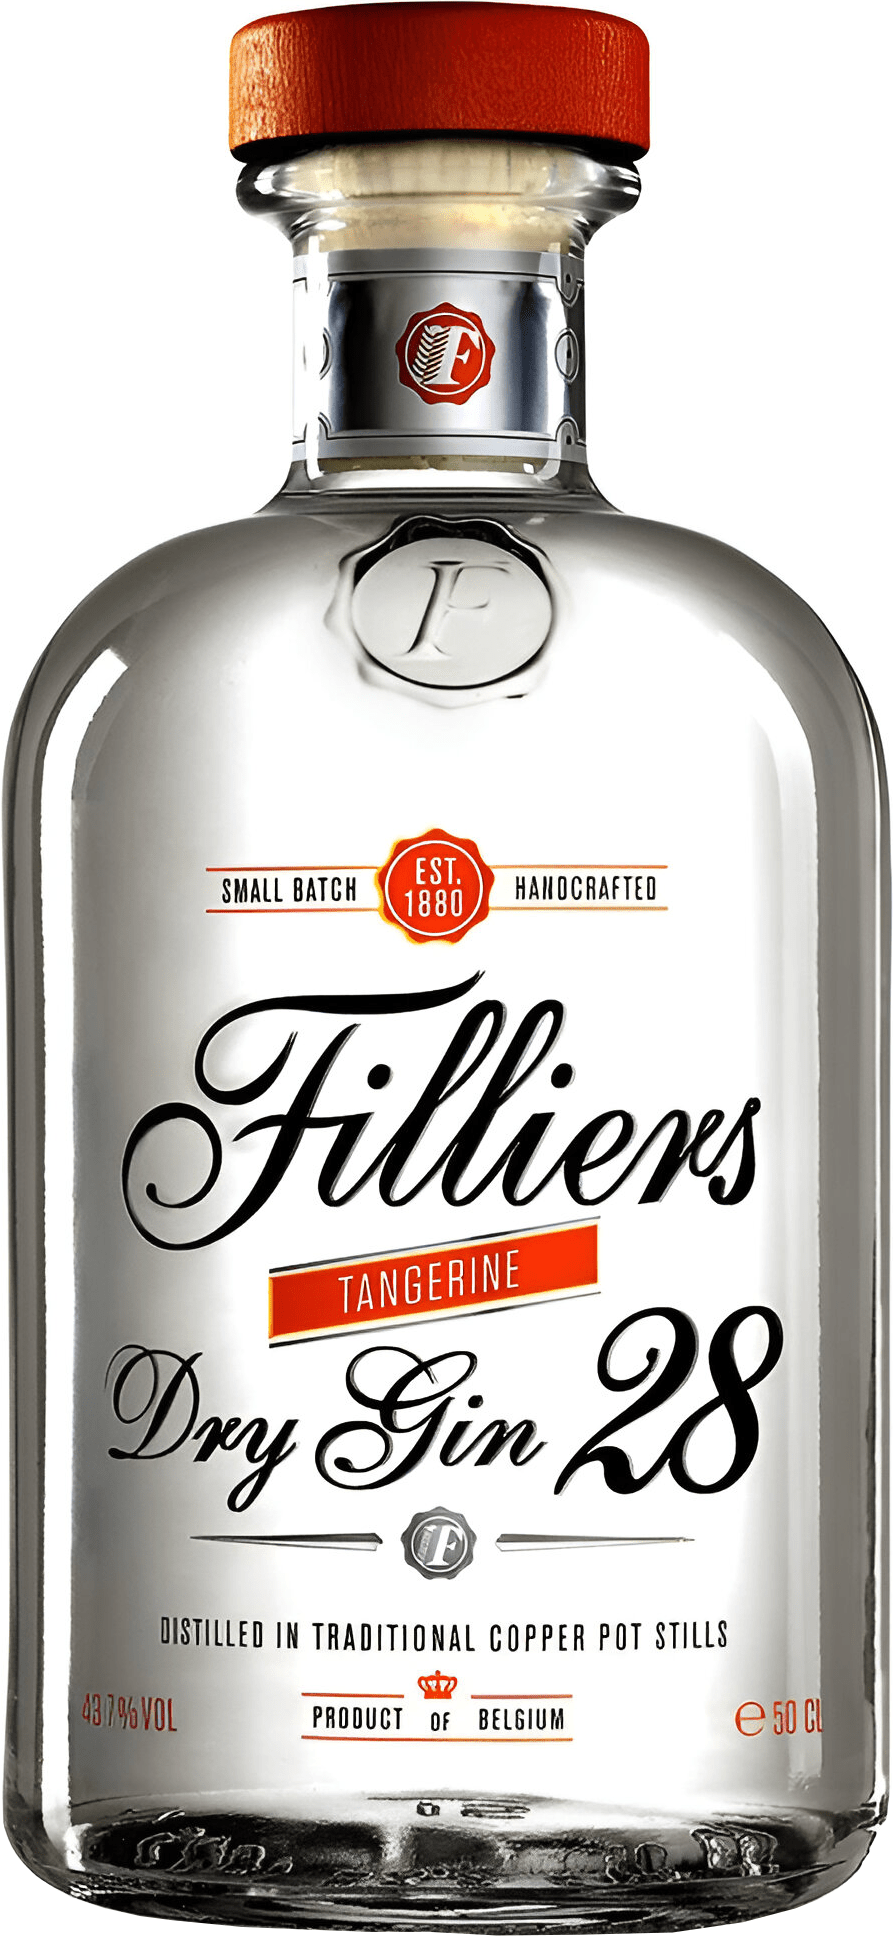 Filliers Dry Gin 28 Tangerine 43,7% 0,5l